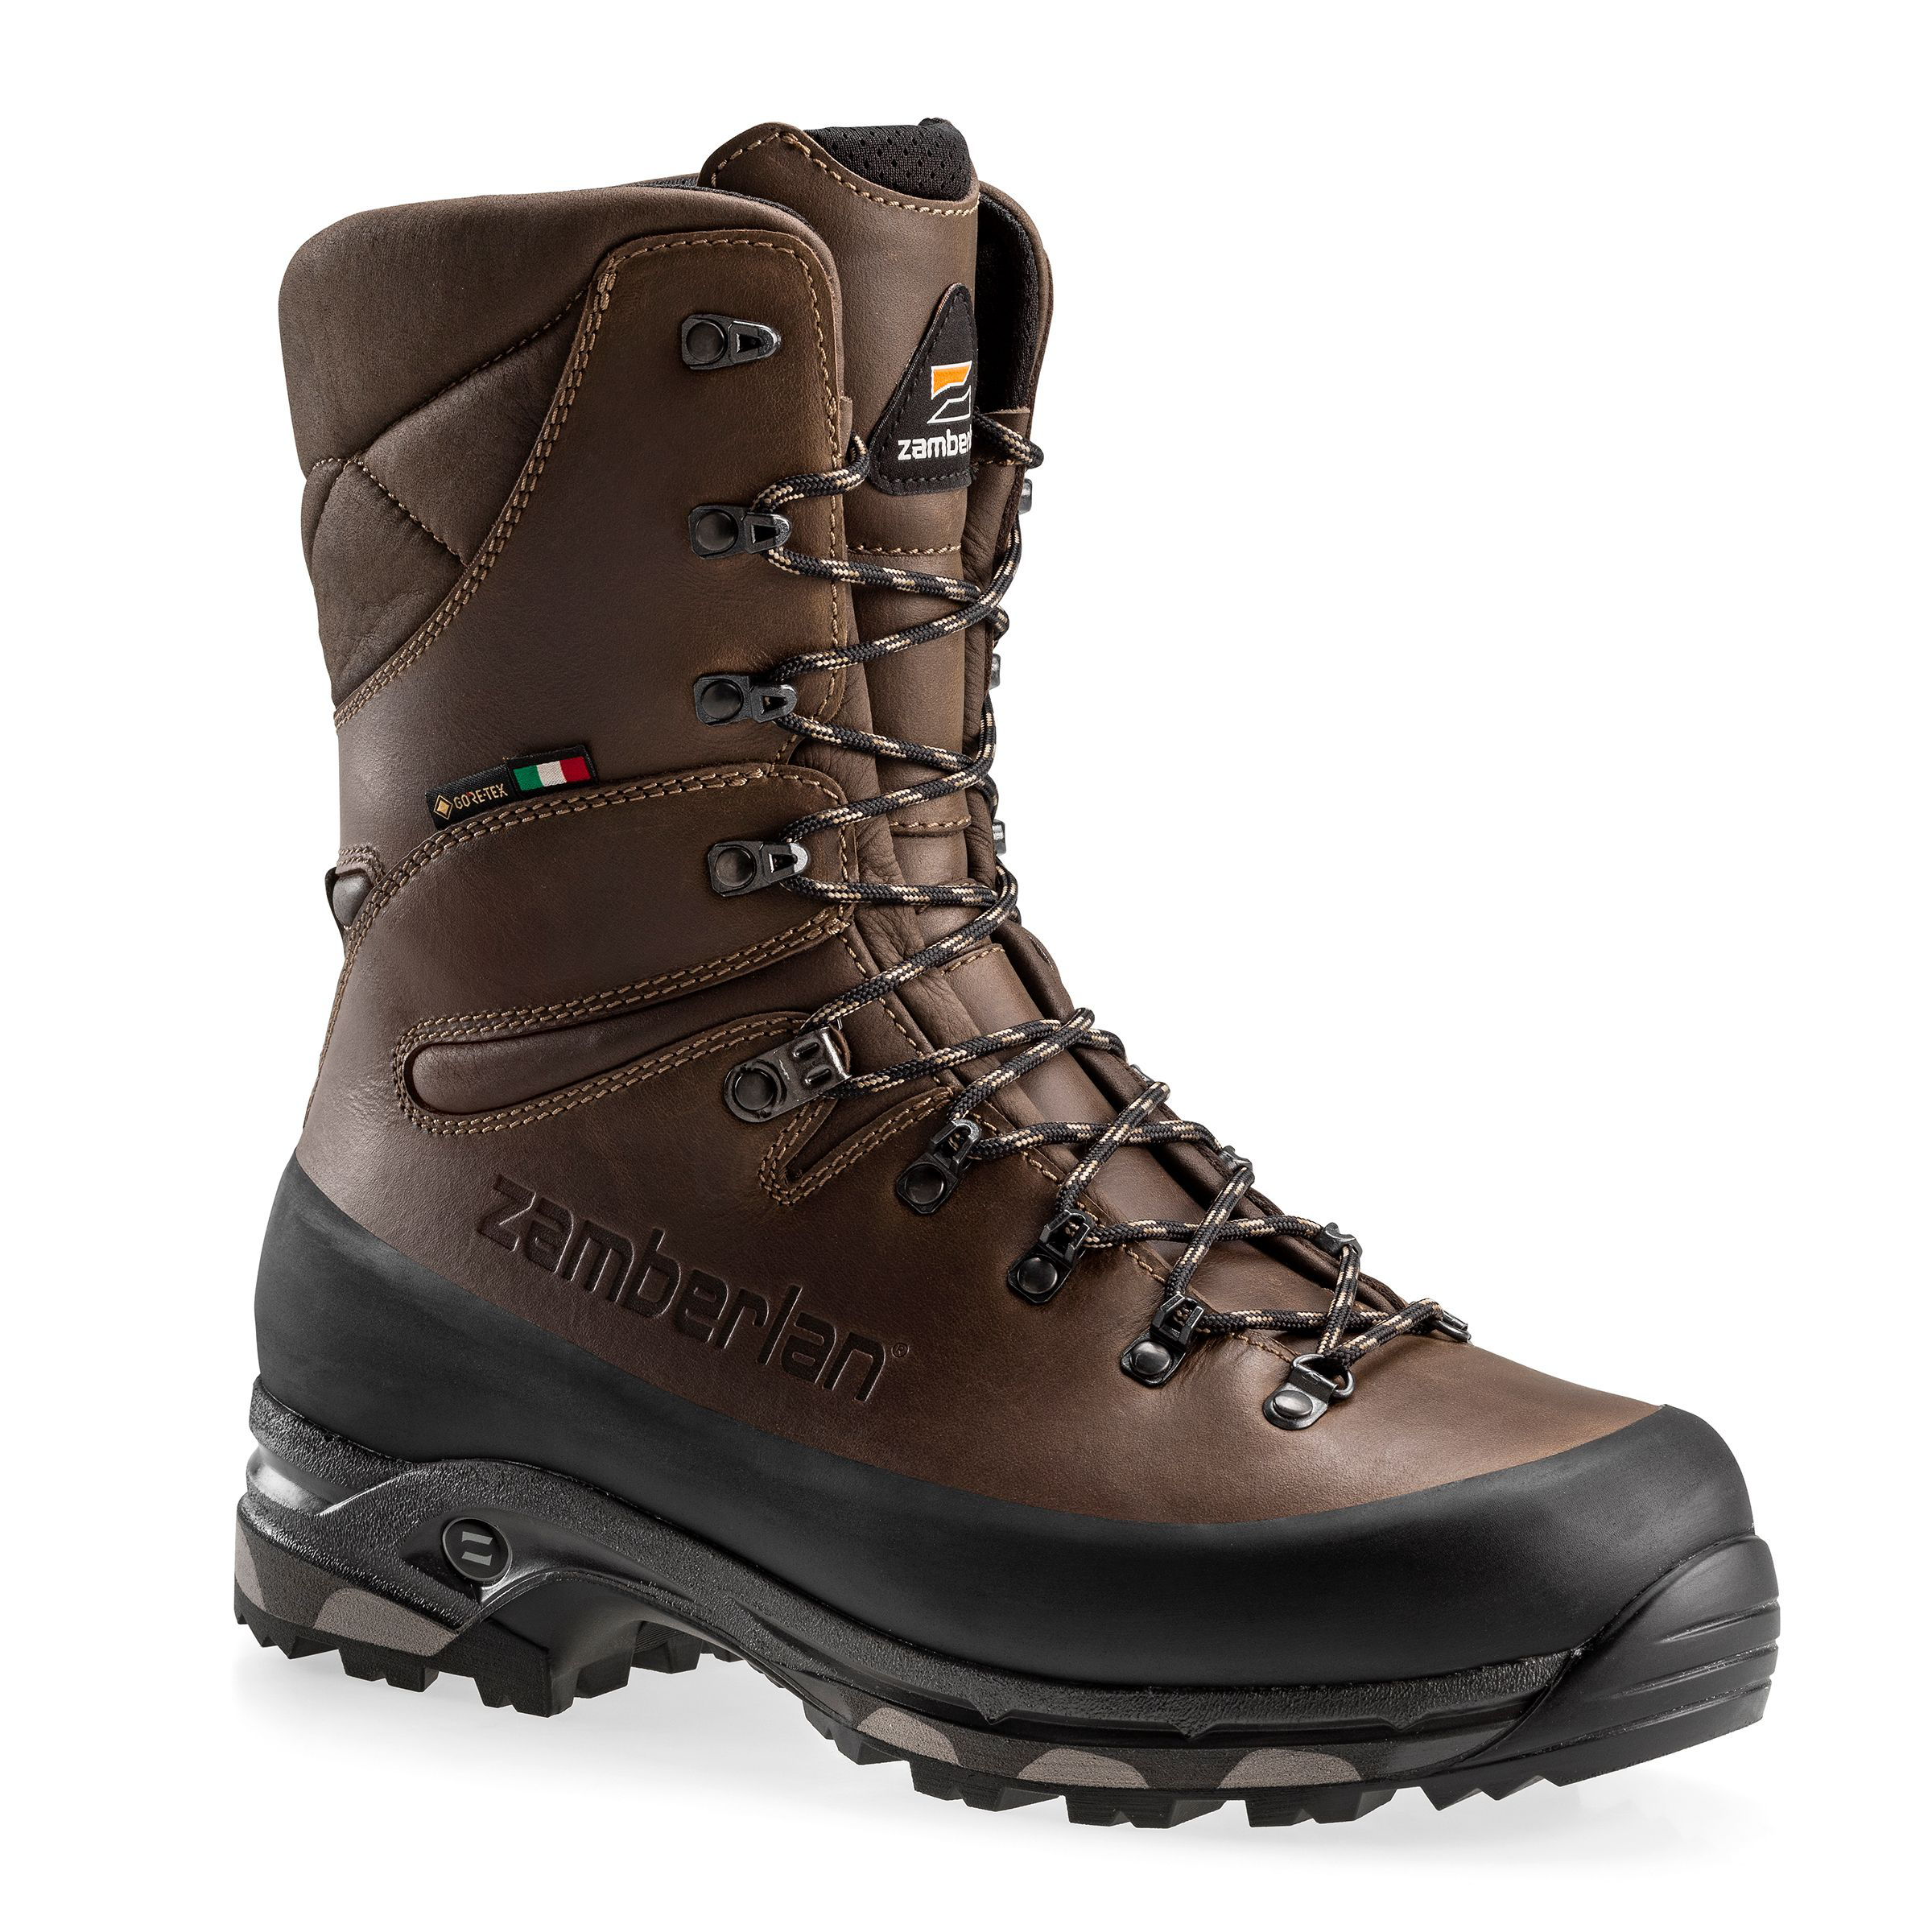 Zamberlan 1005 Hunter Pro GTX RR WL GORE-TEX Insulated Hunting Boots for Men - Brown - 13W